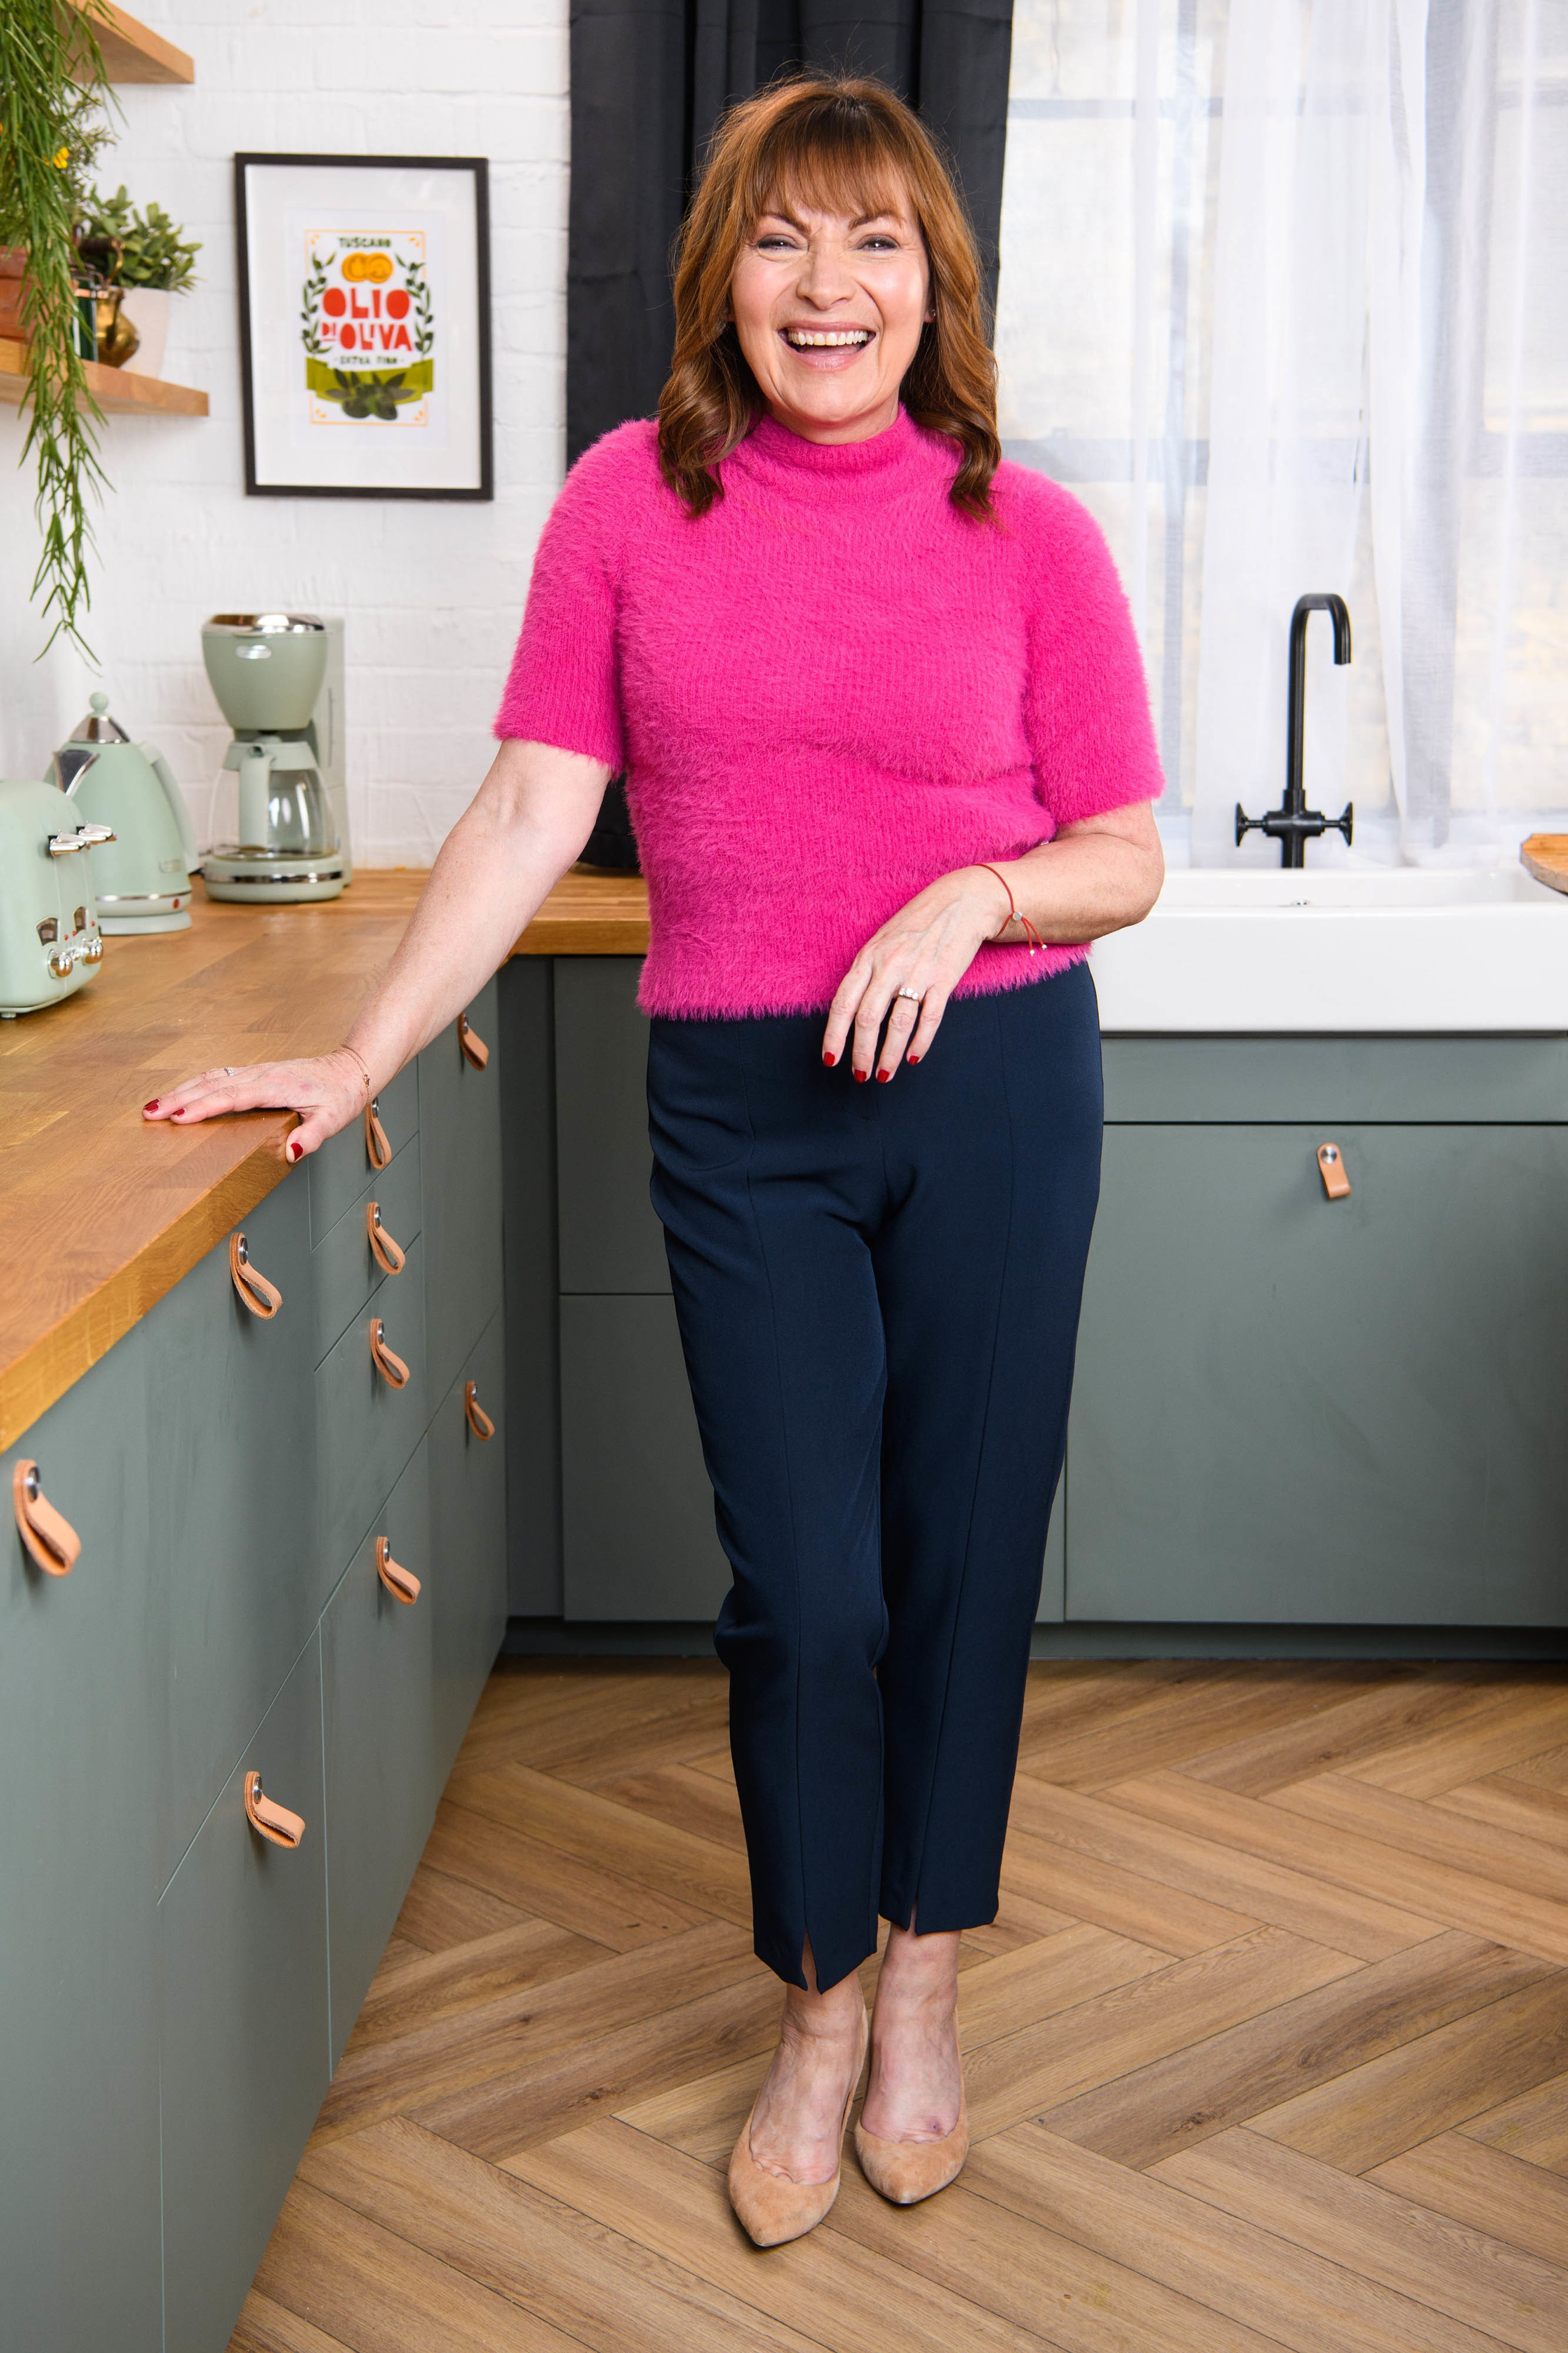 Lorraine Kelly in a pink top and blue trousers, standing in a kitchen, smiling at the camera